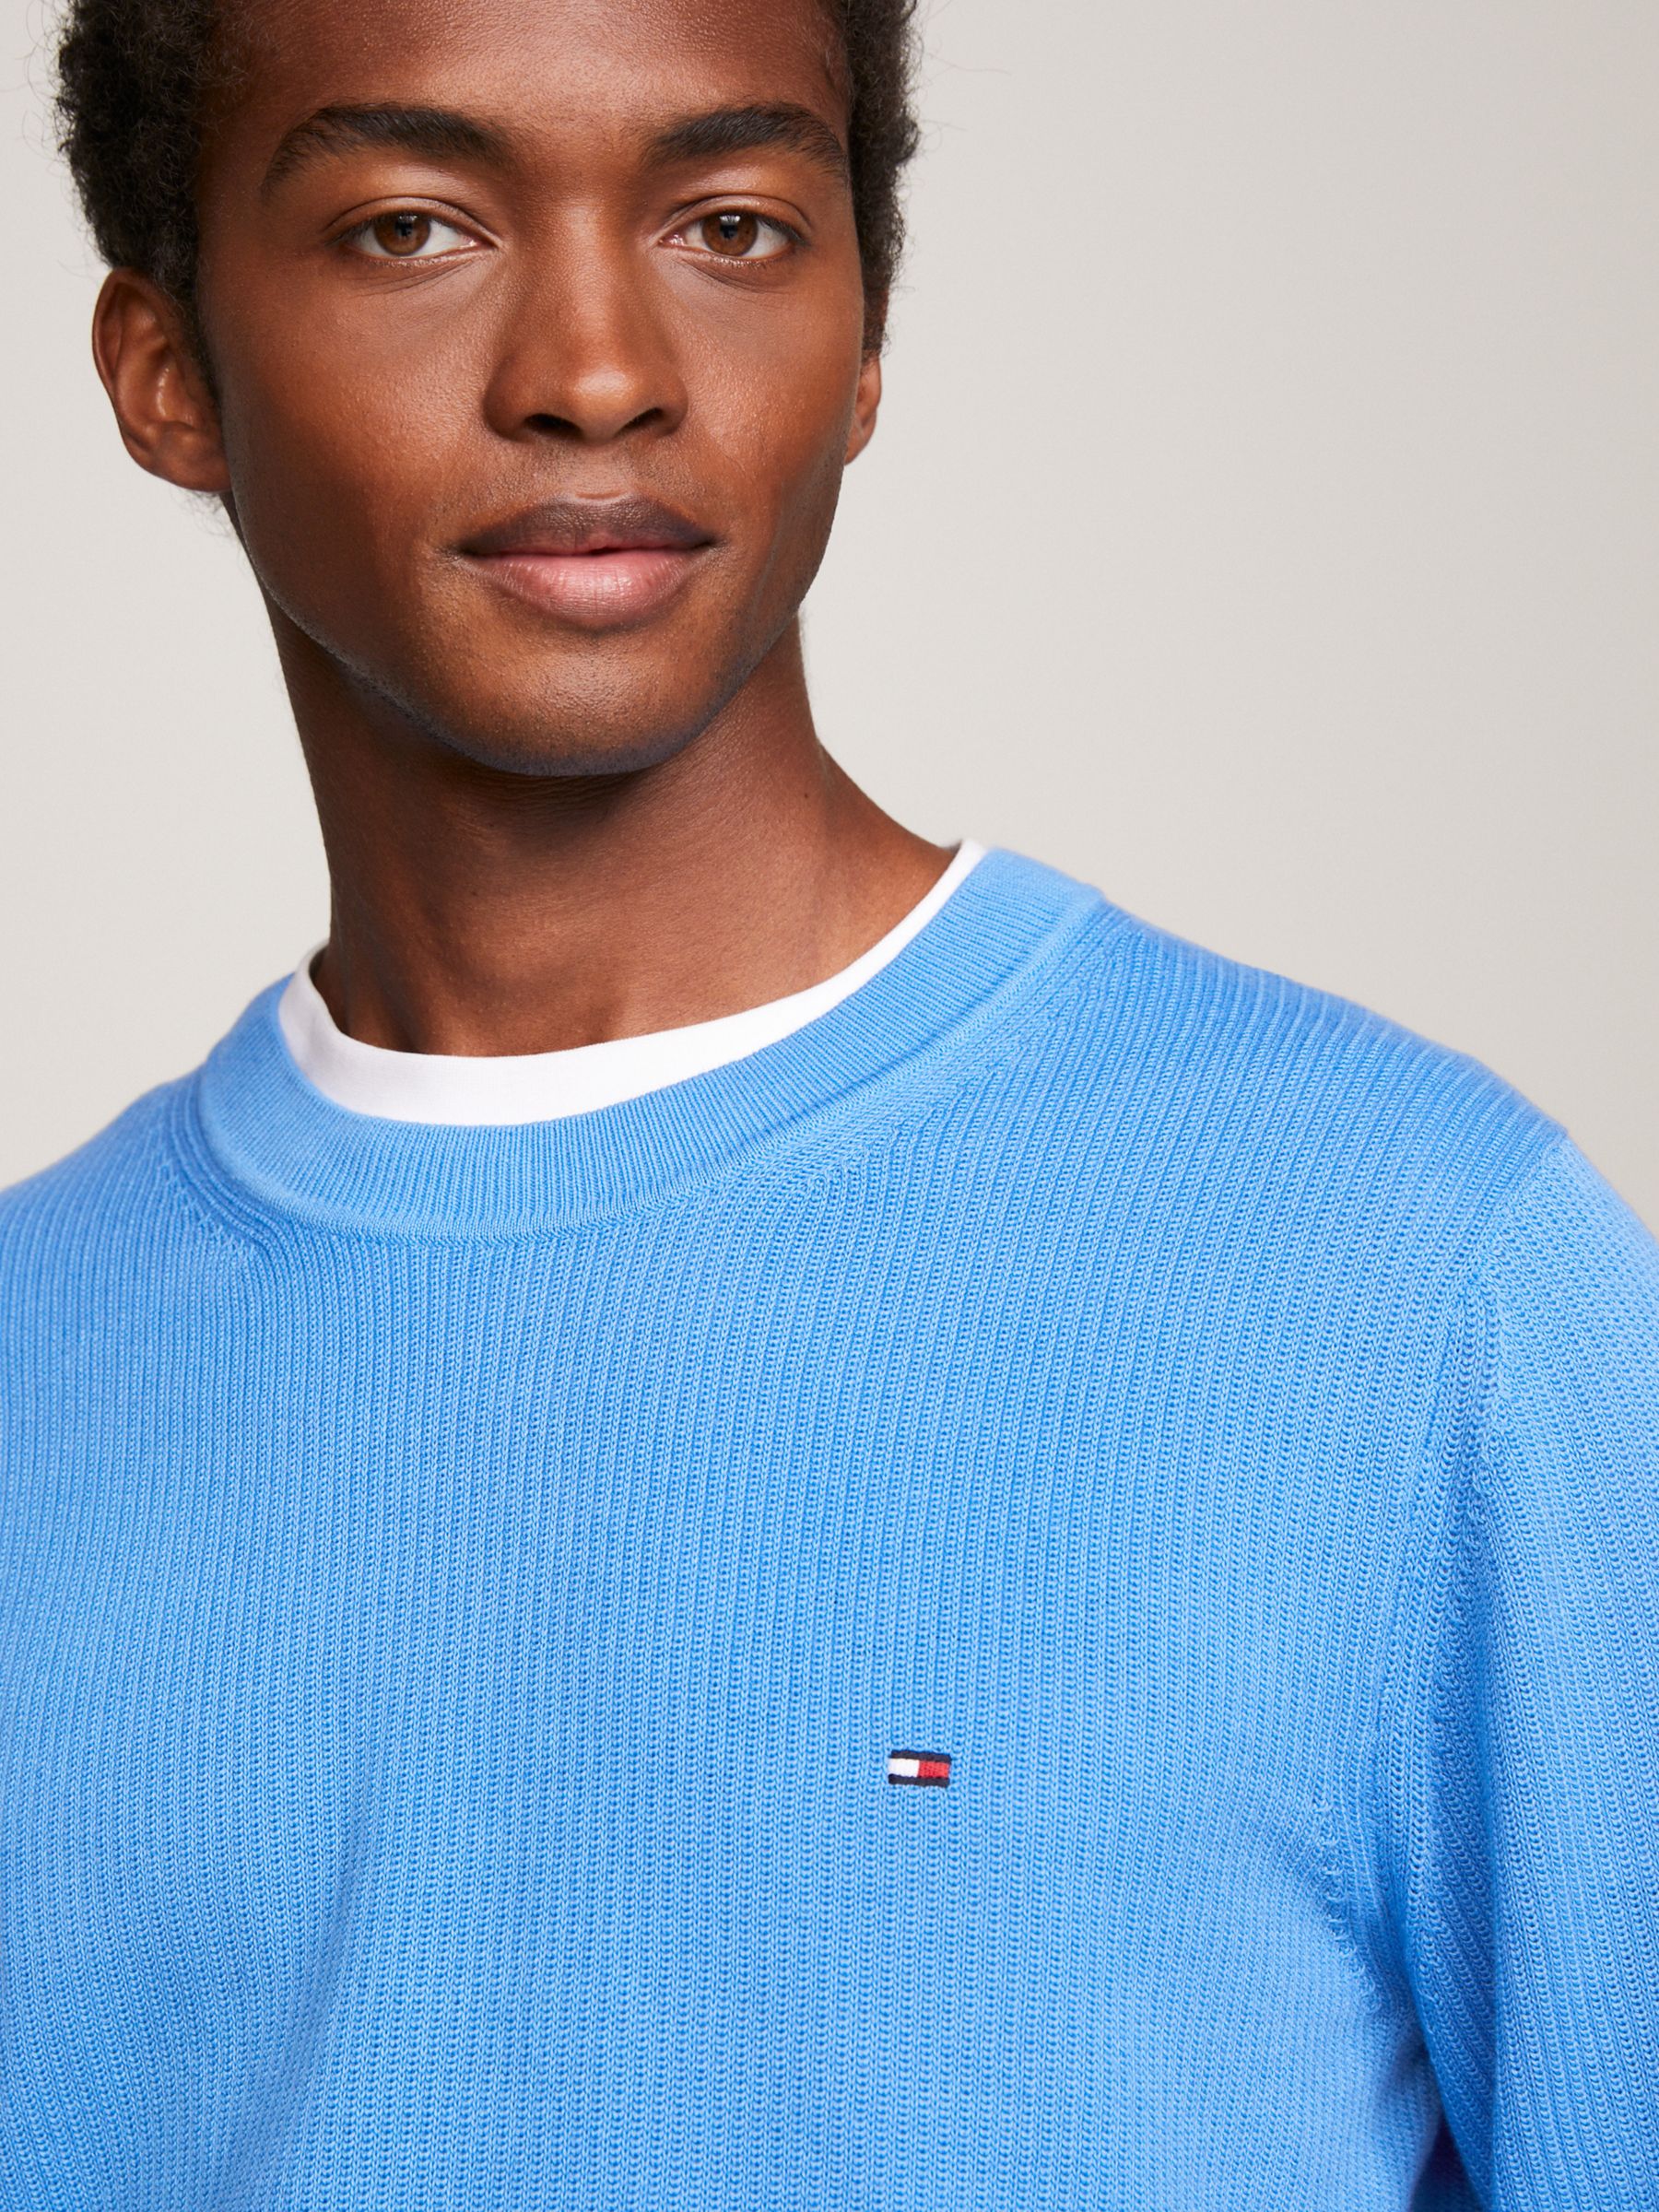 Tommy Hilfiger Chain Ridge Structure Jumper, Blue at John Lewis & Partners